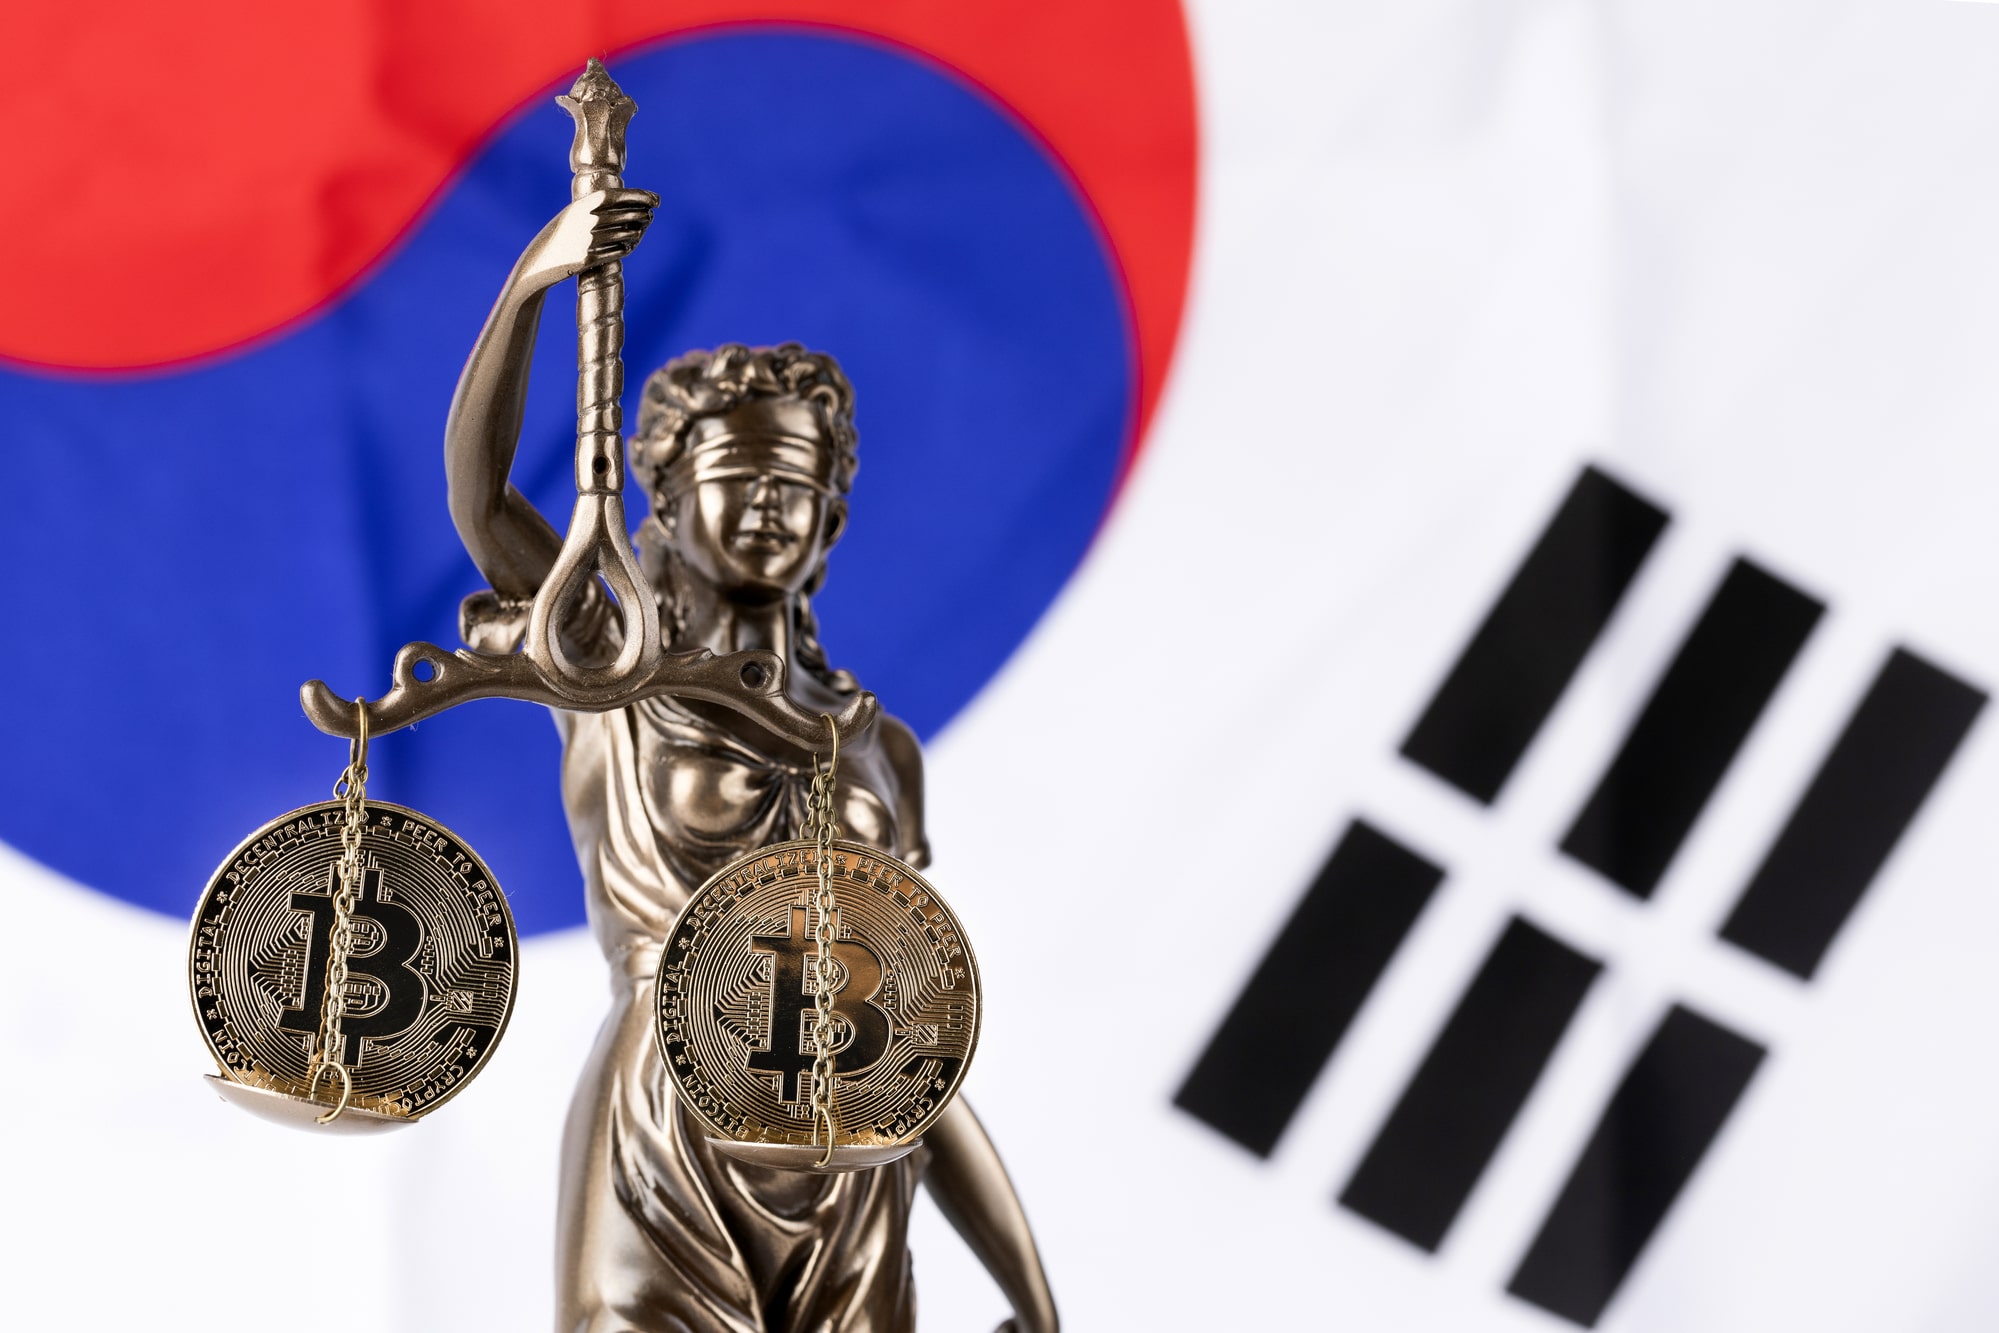 Over 60 South Korea’s crypto exchanges will shut down next week